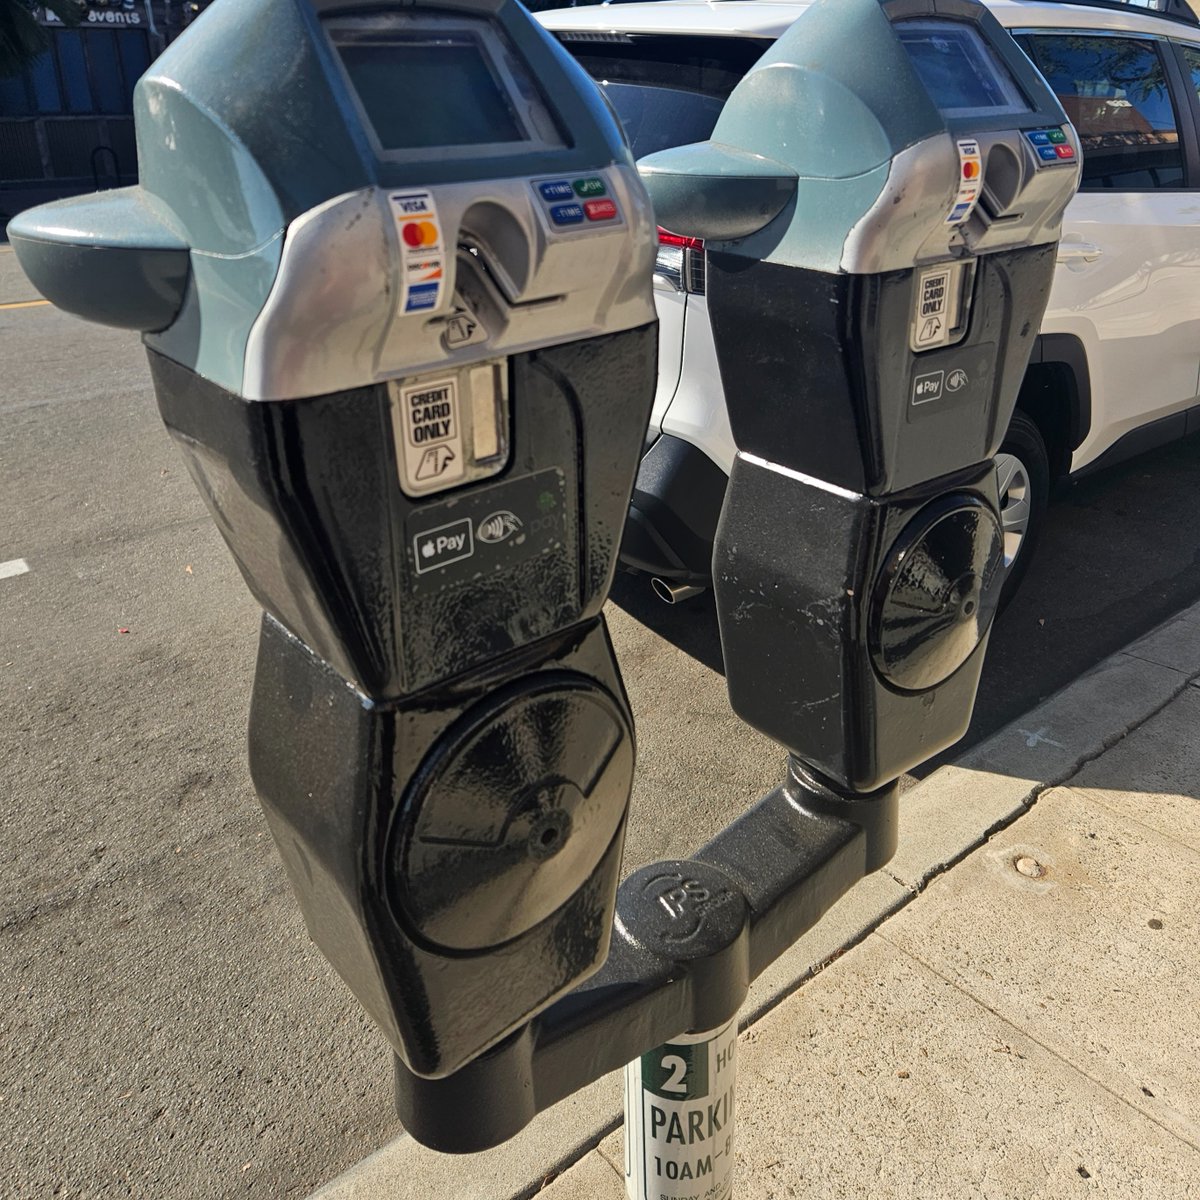 New parking meters are coming to #EastVillage. This will help manage parking and increase turnover for the benefit of residents and businesses. The meters will cost $1.25 an hour, with a 2-hour time limit. Revenues will be used on mobility-related improvements in the area.